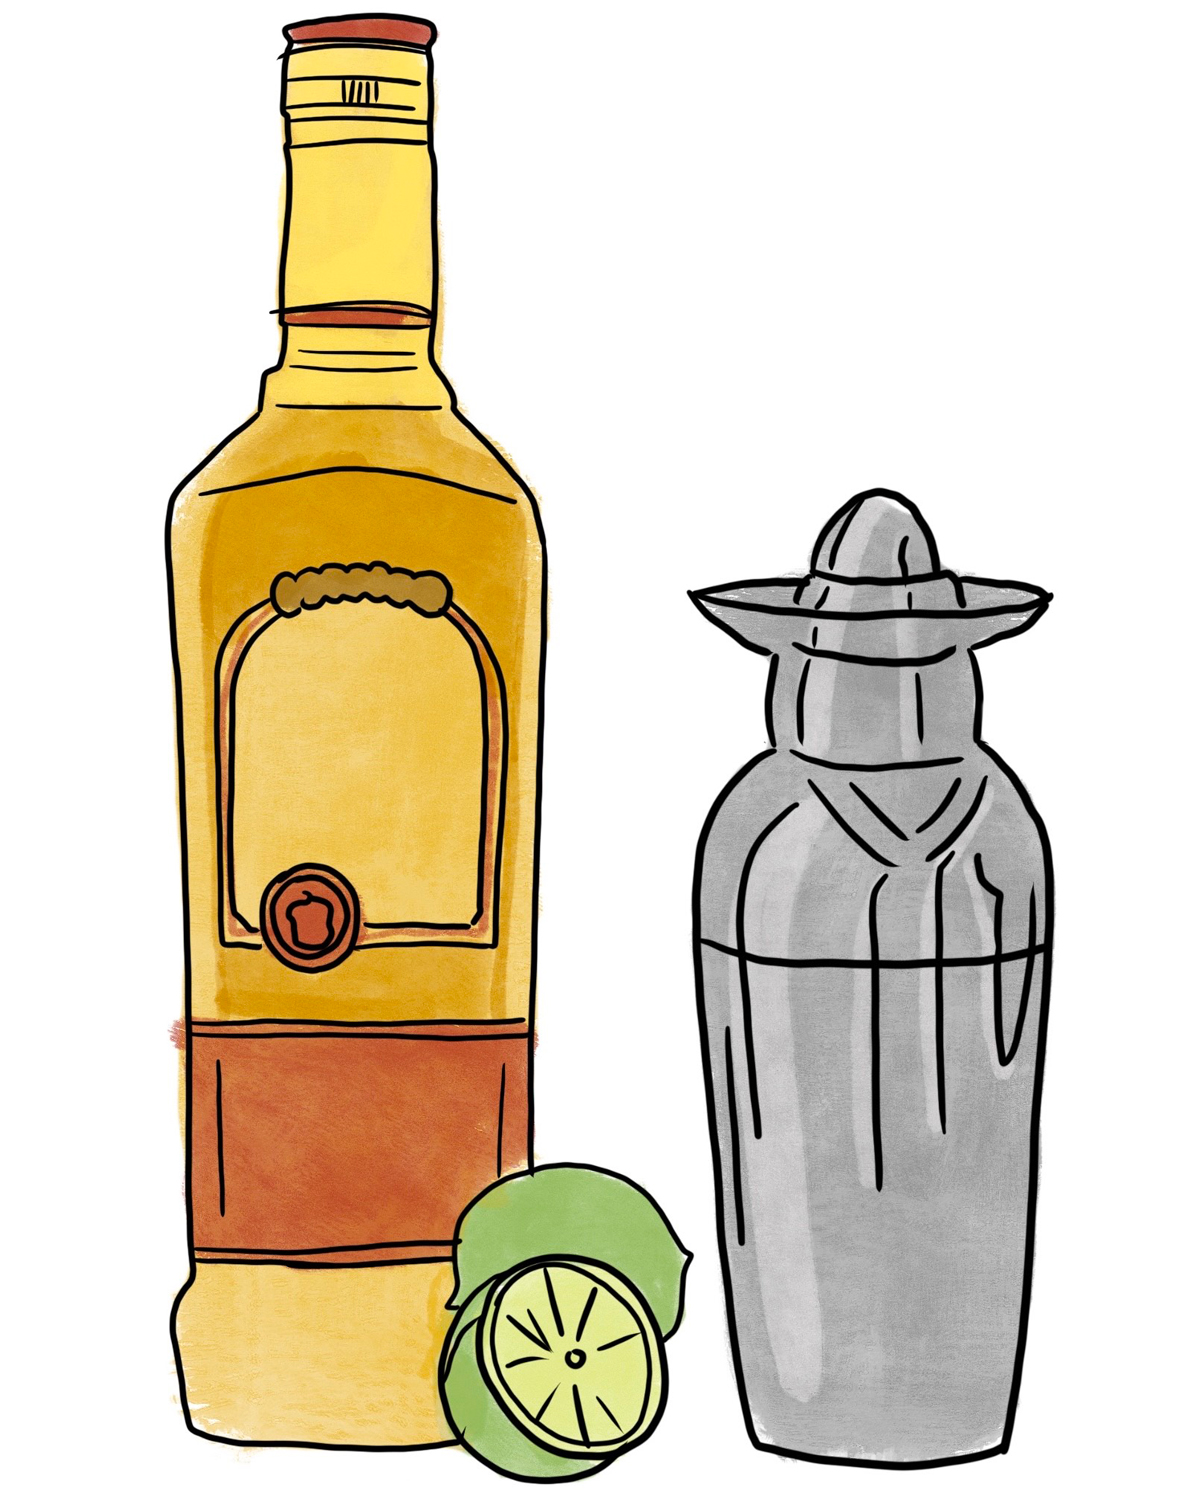 An illustration of cocktail mixer